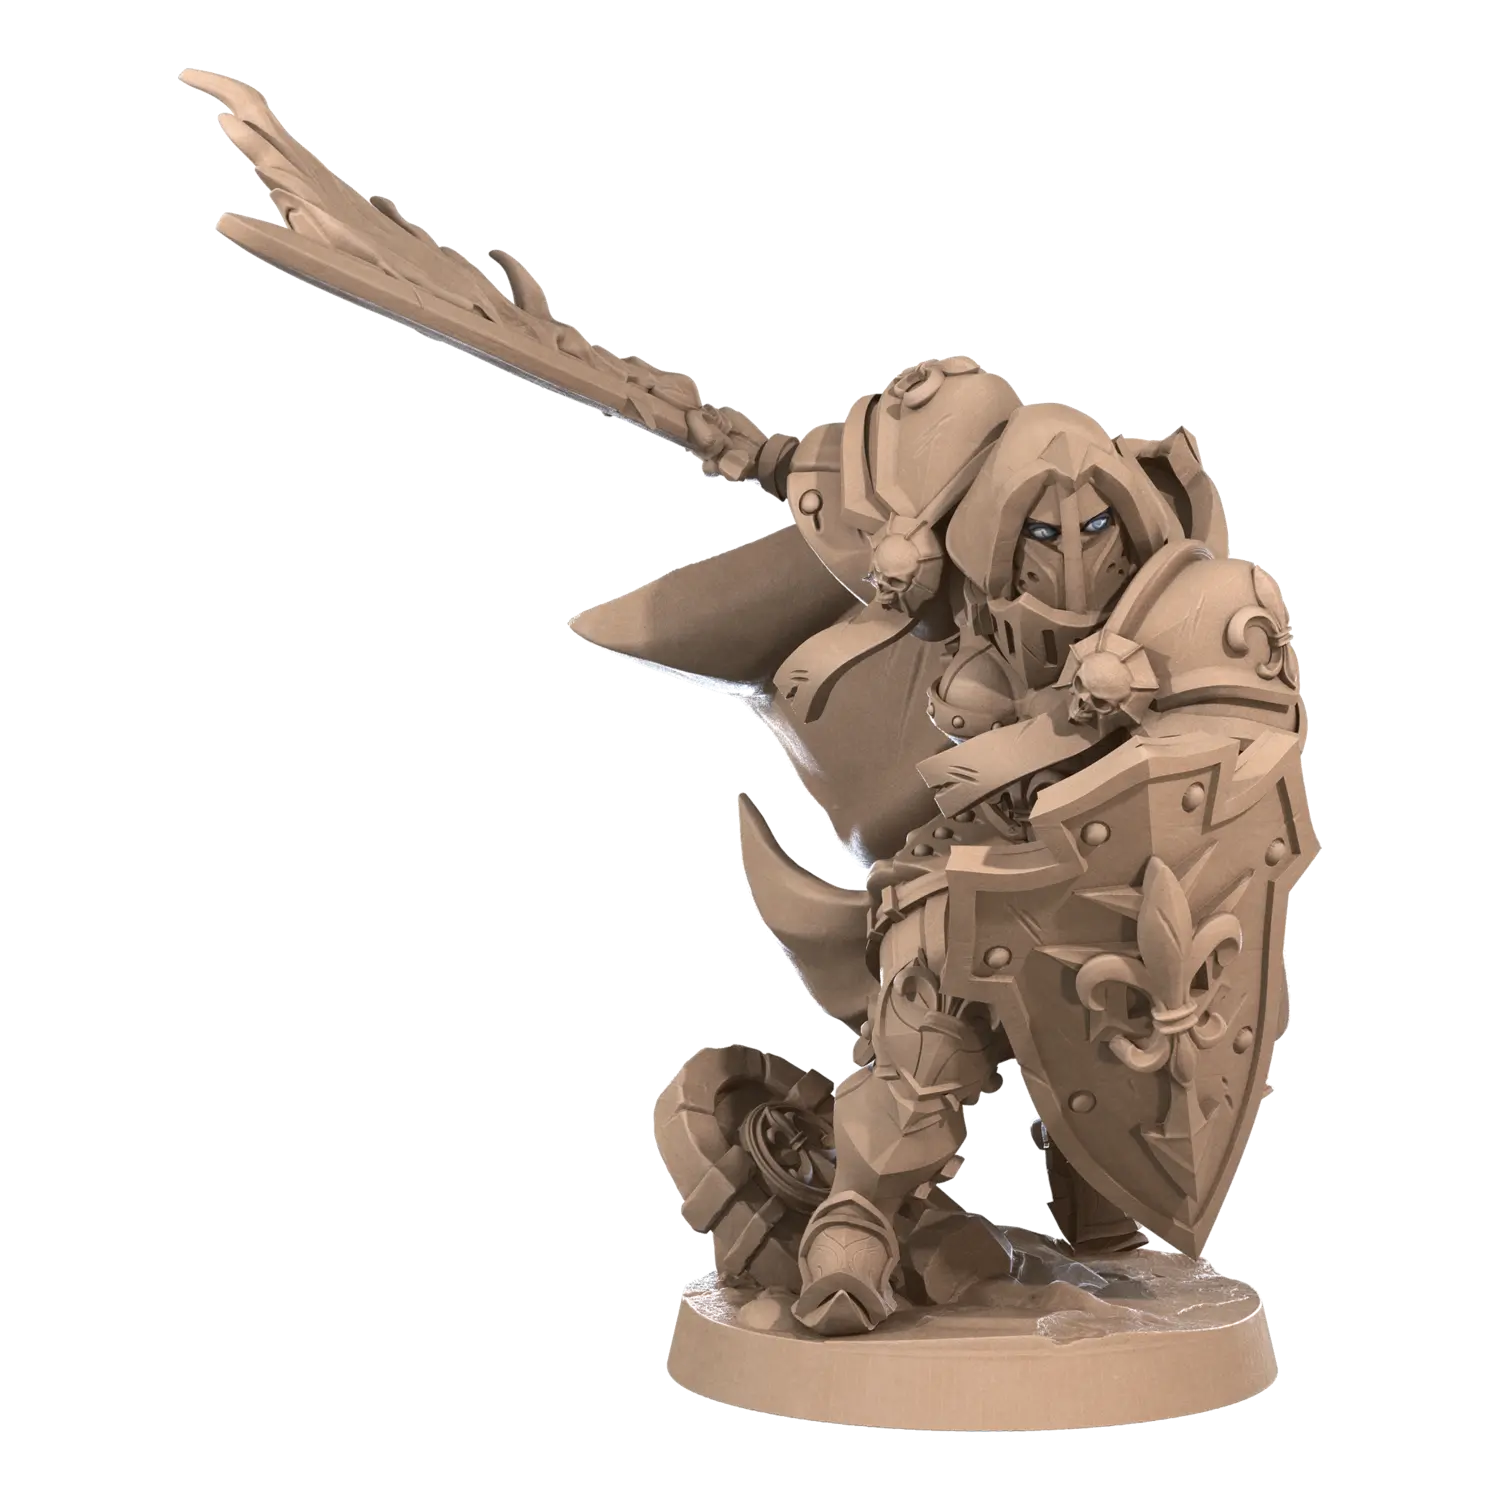 DnD Battle Sisters - Fighter - Human - Miniature - Paladin Rosalind 01 Battle Sisters - Fighter - Human - Miniature - Paladin sold by DoubleHitShop